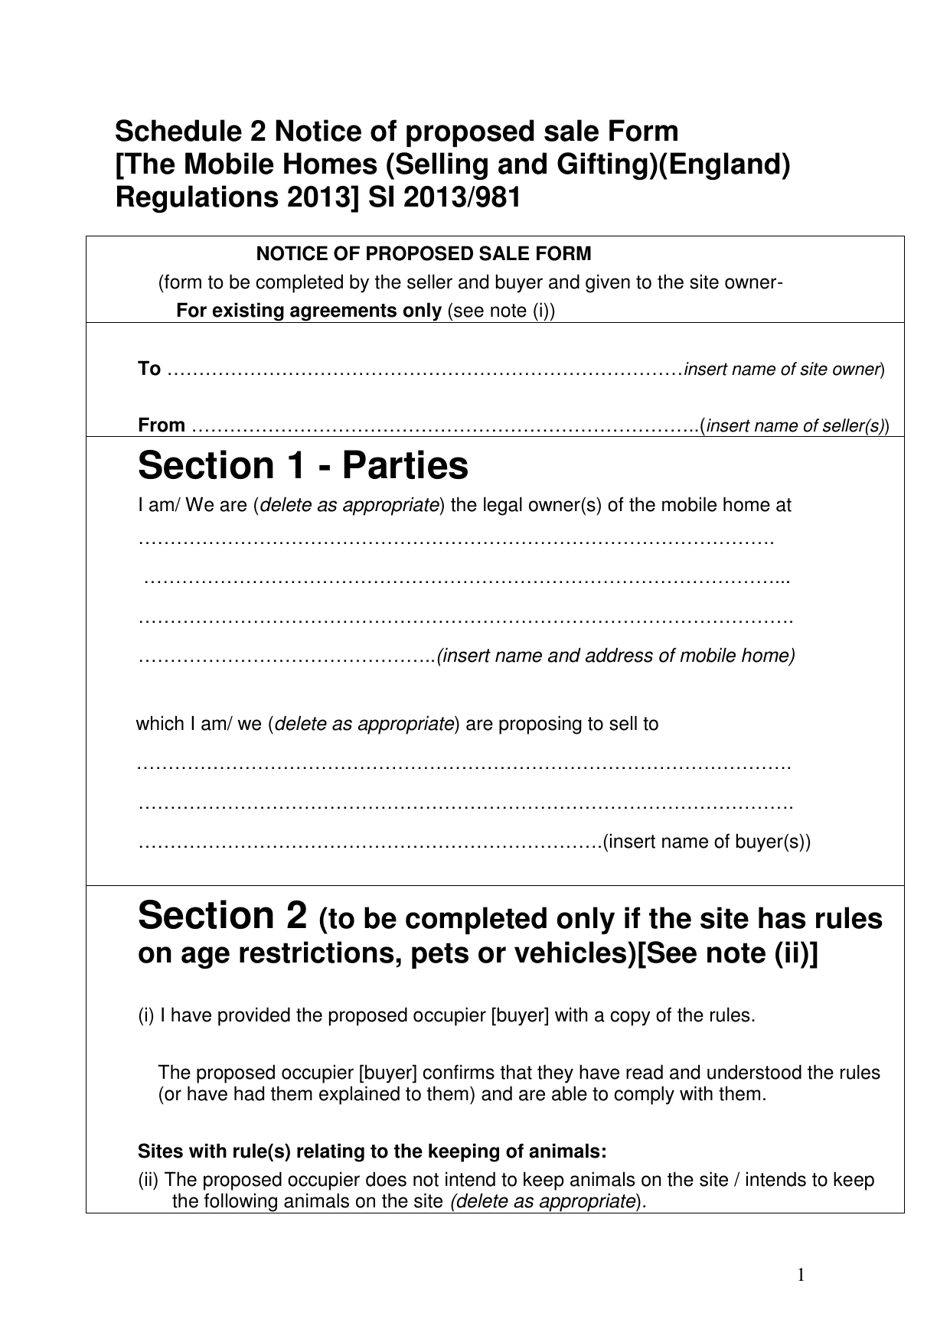 Schedule 2 Notice of Proposed Sale Form: Park Homes - United Kingdom, Page 1